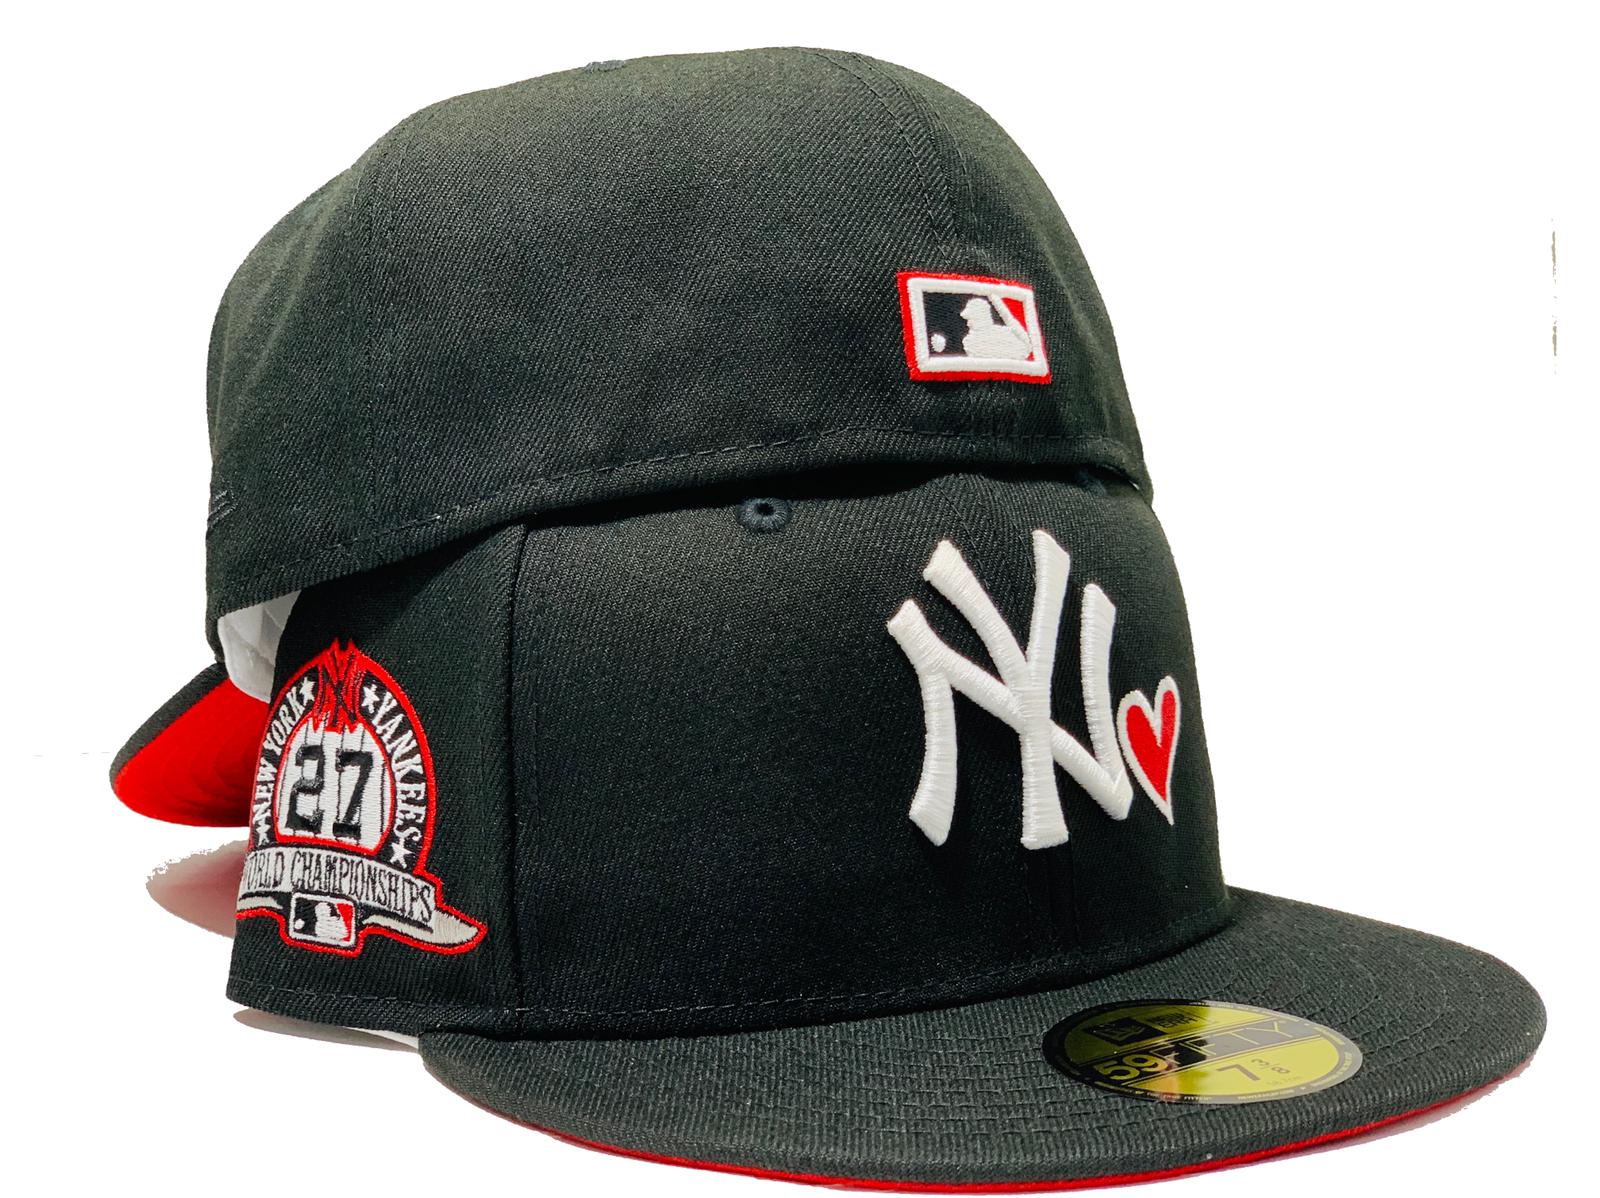 black and red fitted hat with patch